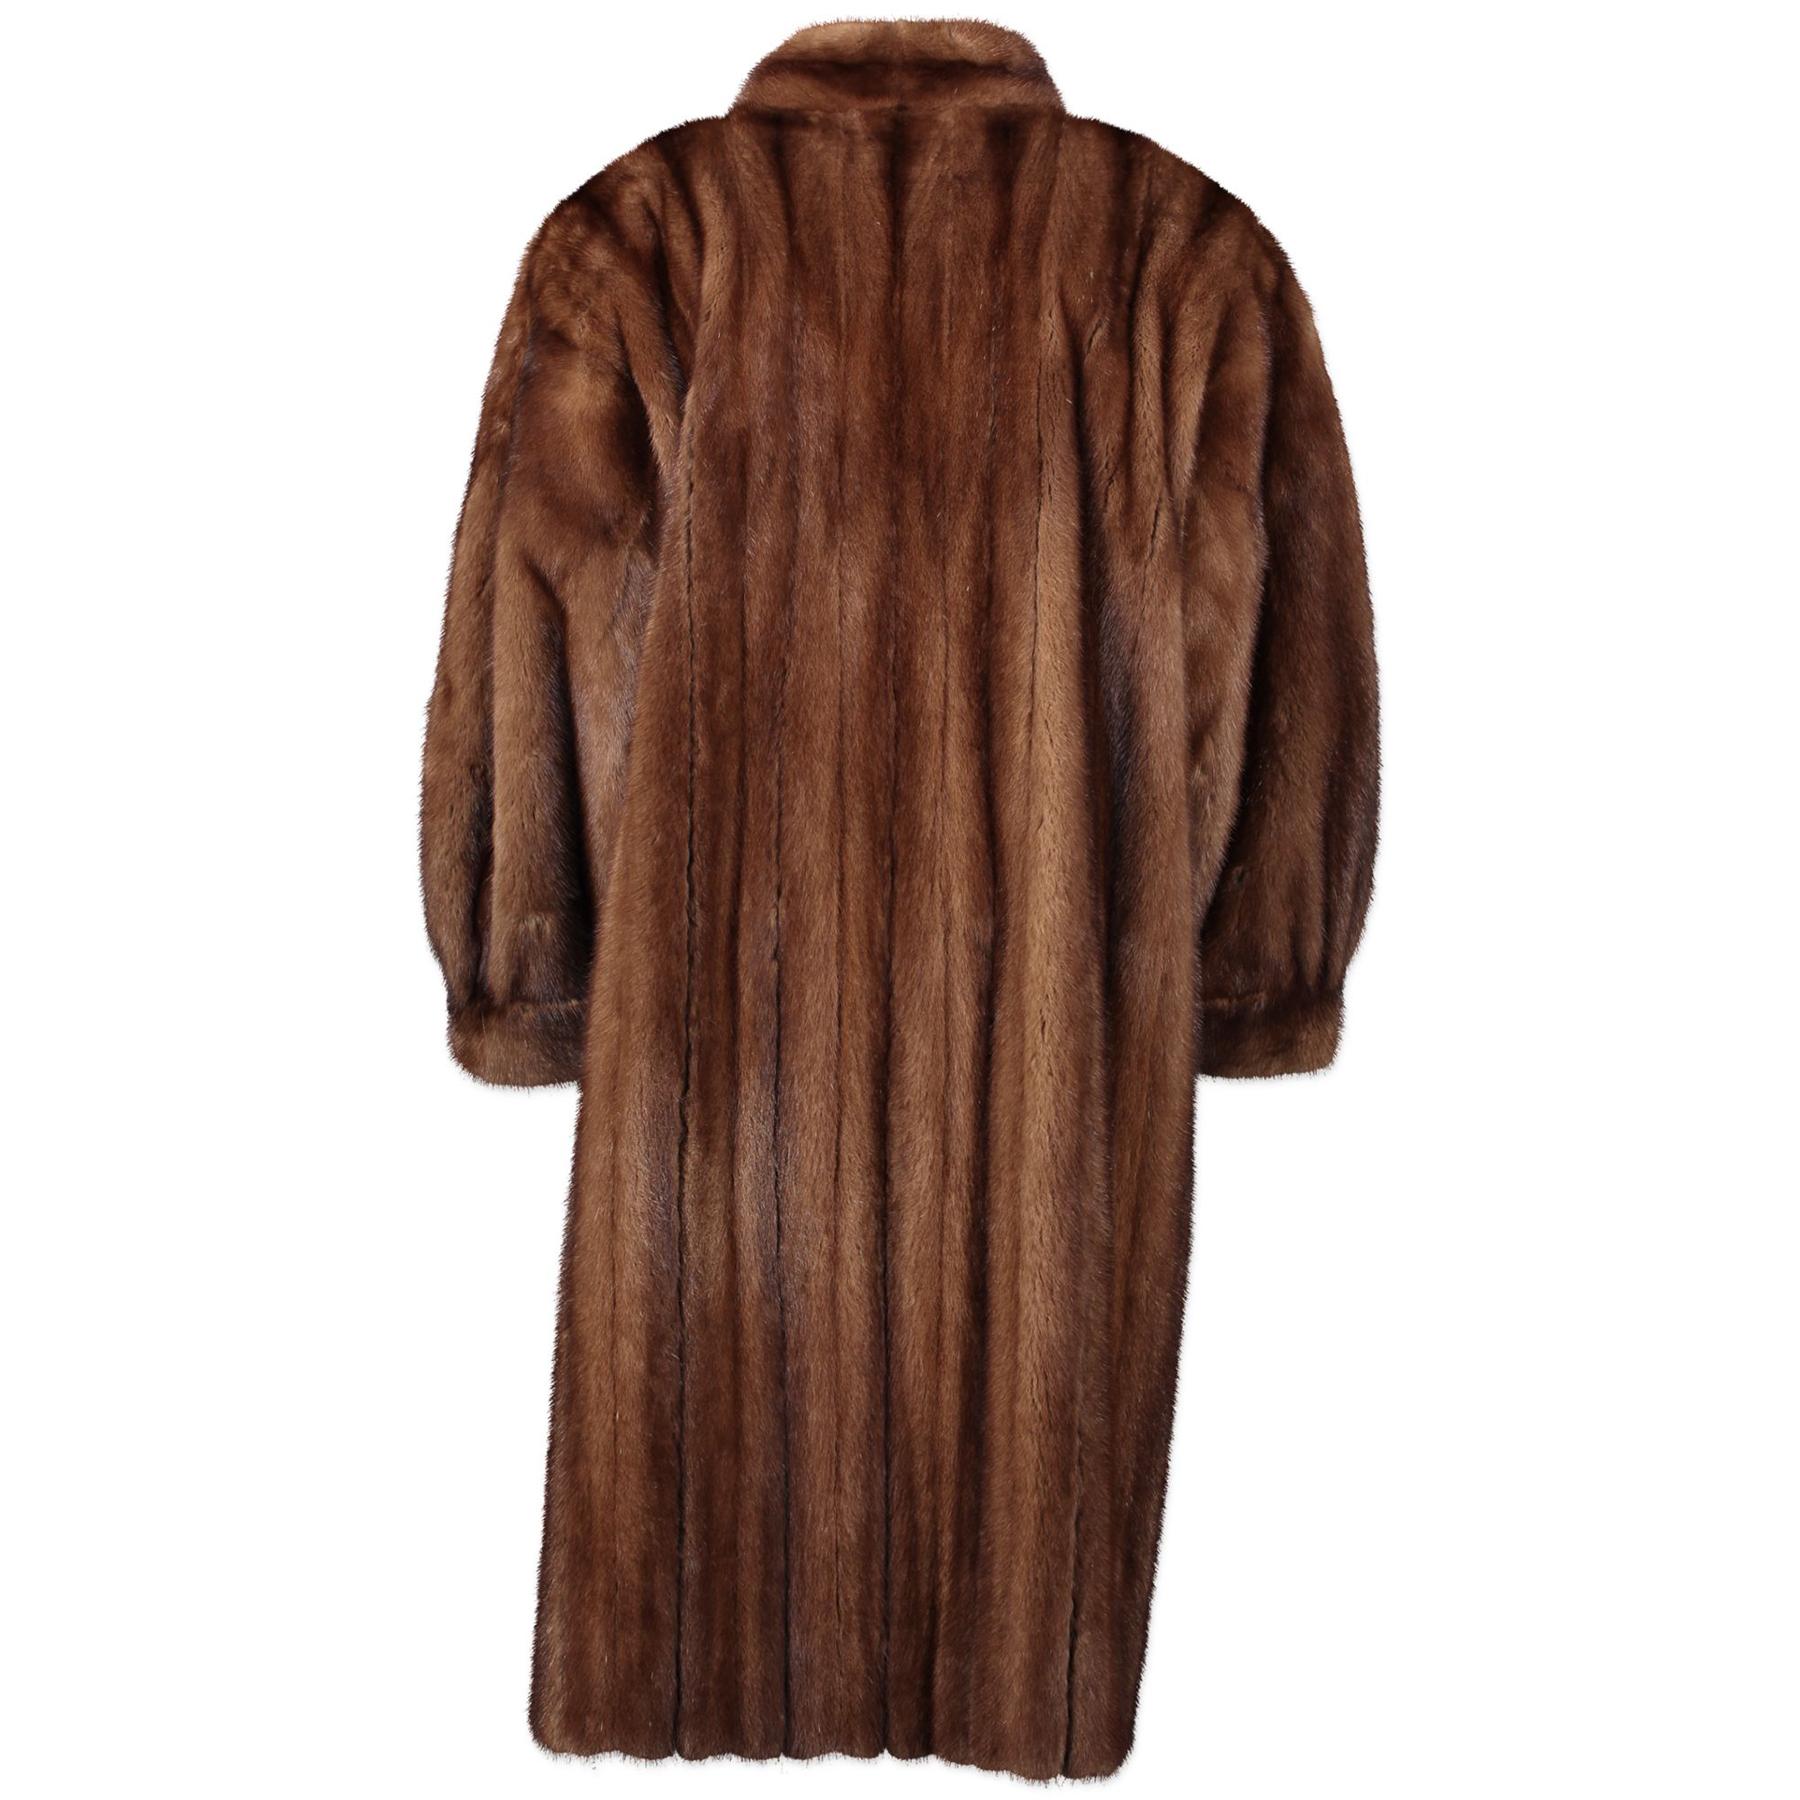 Yves Saint Laurent Long Brown Fur Coat 

Yves Saint Laurent  known for their haute couture and influencial designs.
This vintage jacket is from around 1980.
The jacket combines a vintage touch with the right amount of coolness.

